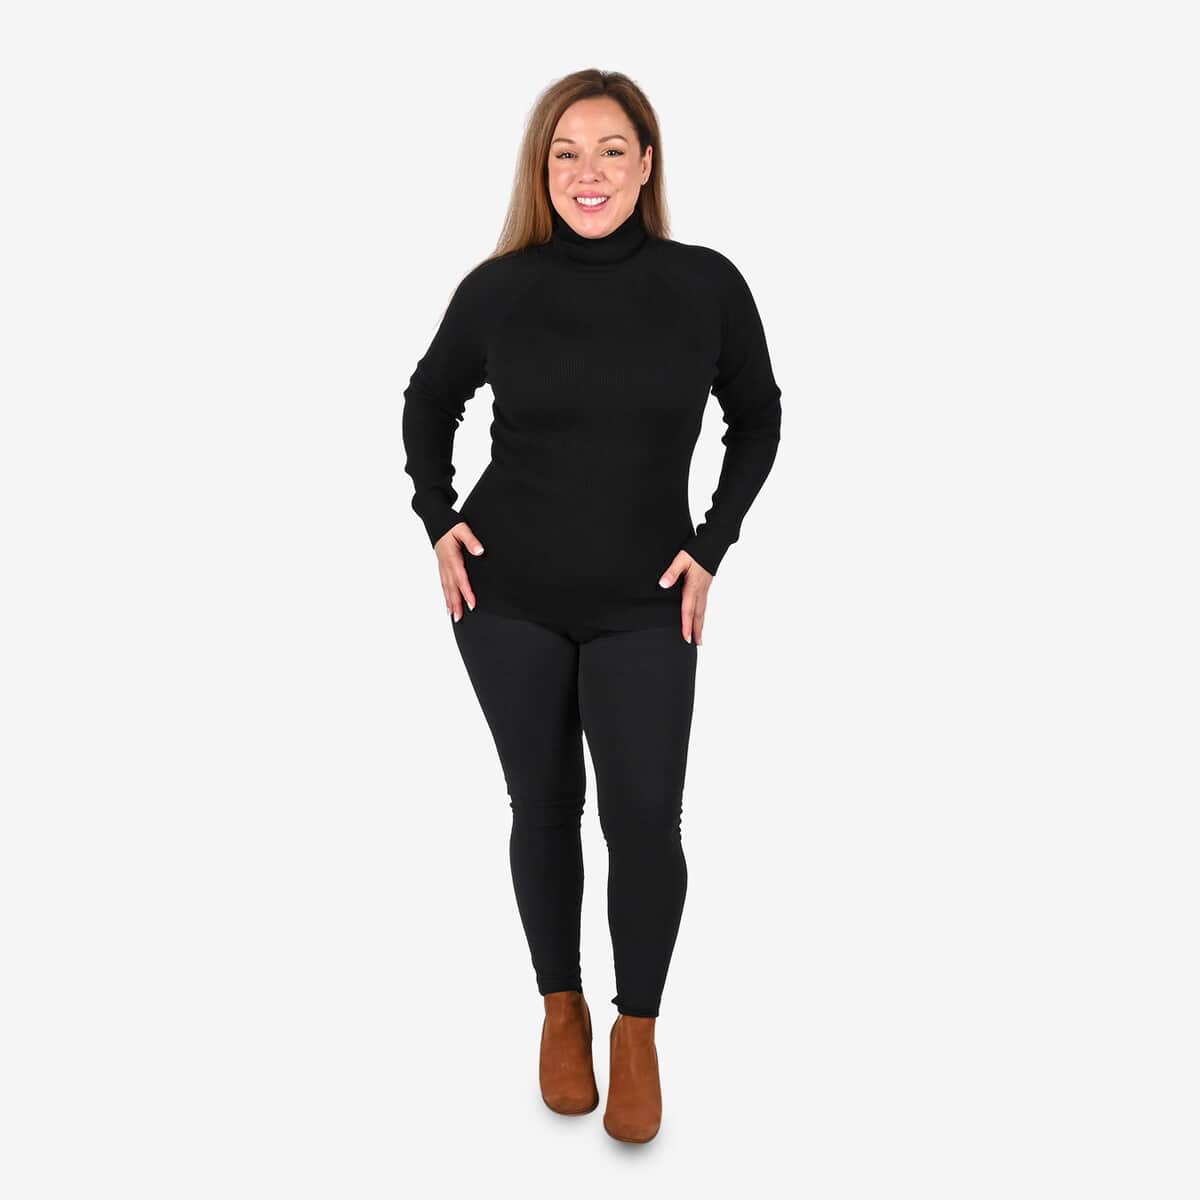 Tamsy Black Knit Turtleneck Sweater - XS image number 0